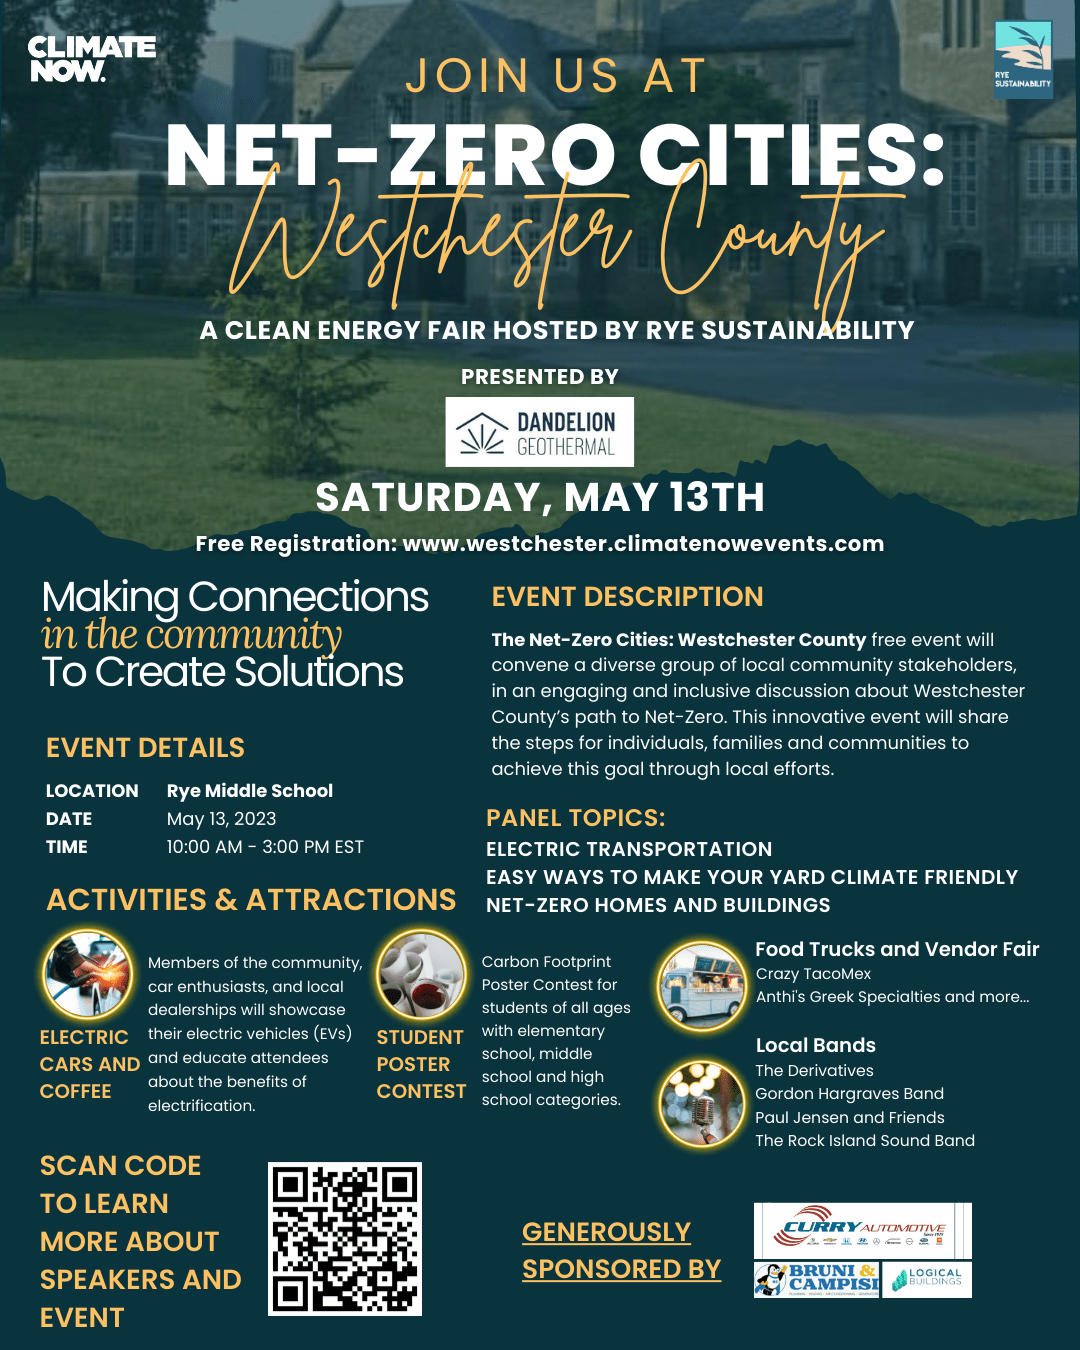 Net-Zero Cities:Westchester County. A Clean Energy Fair Hosted by Rye Sustainability & Produced by Climate Now